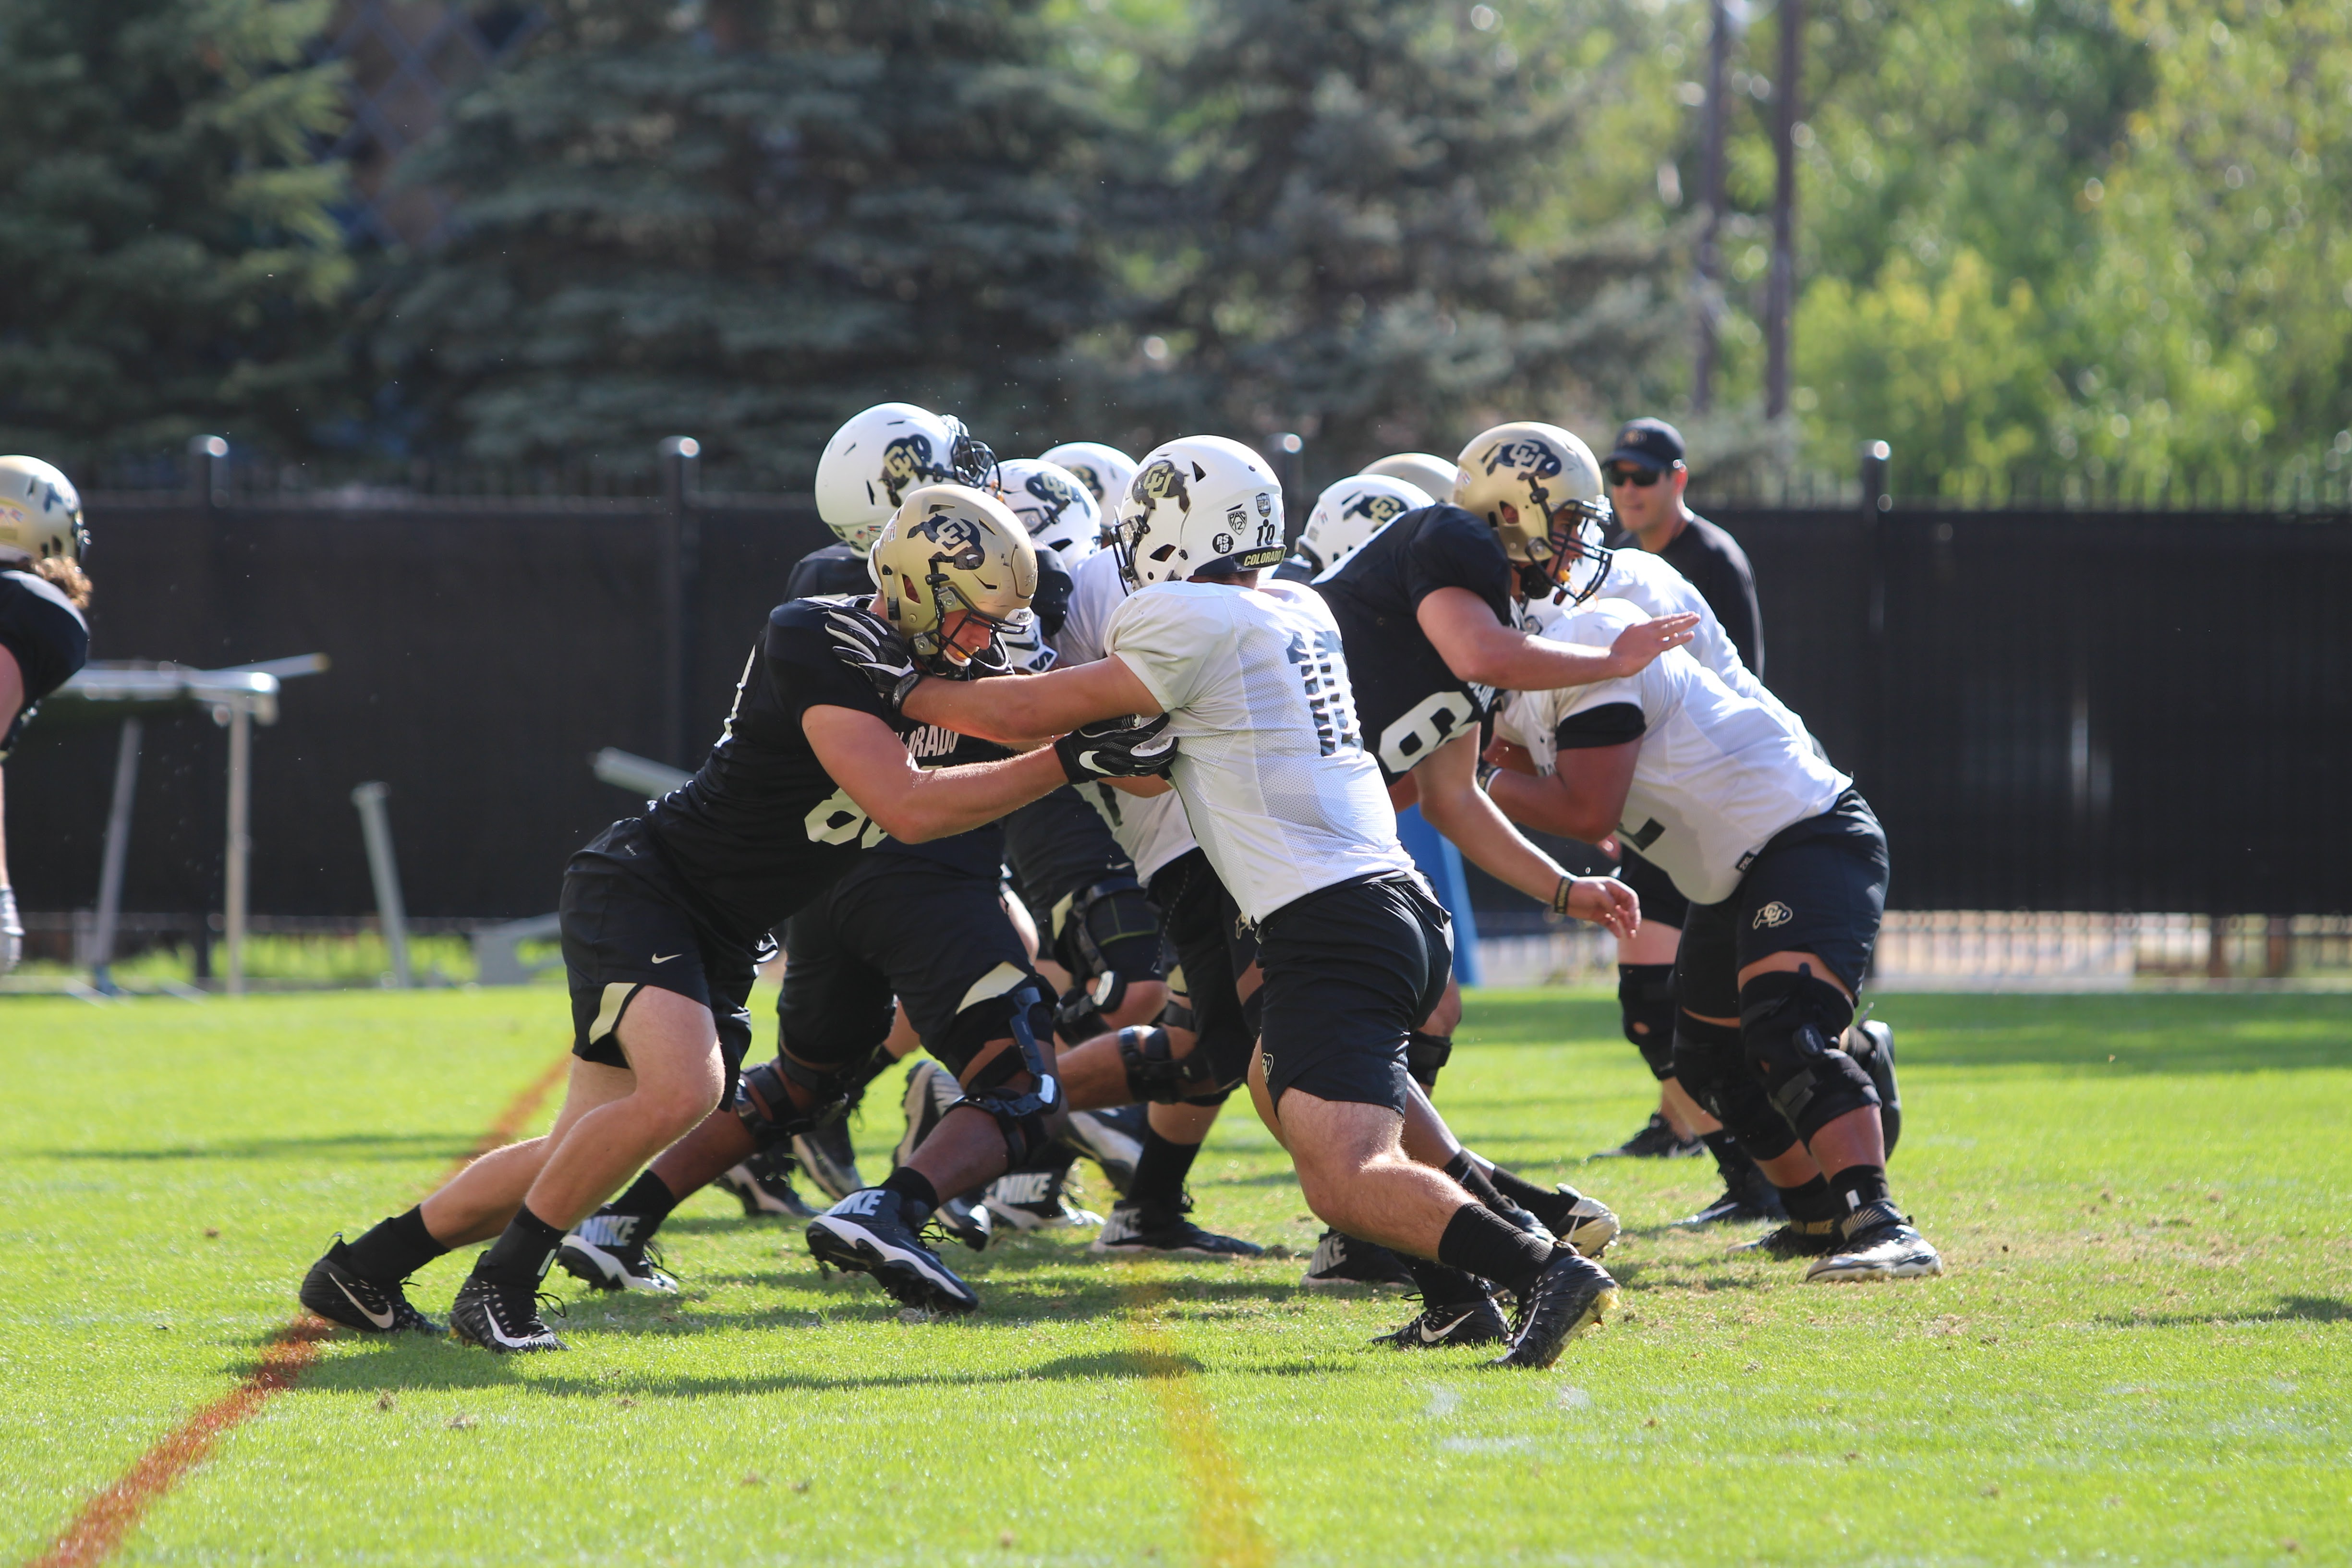 Despite great play, still room for improvement on defense for Buffs